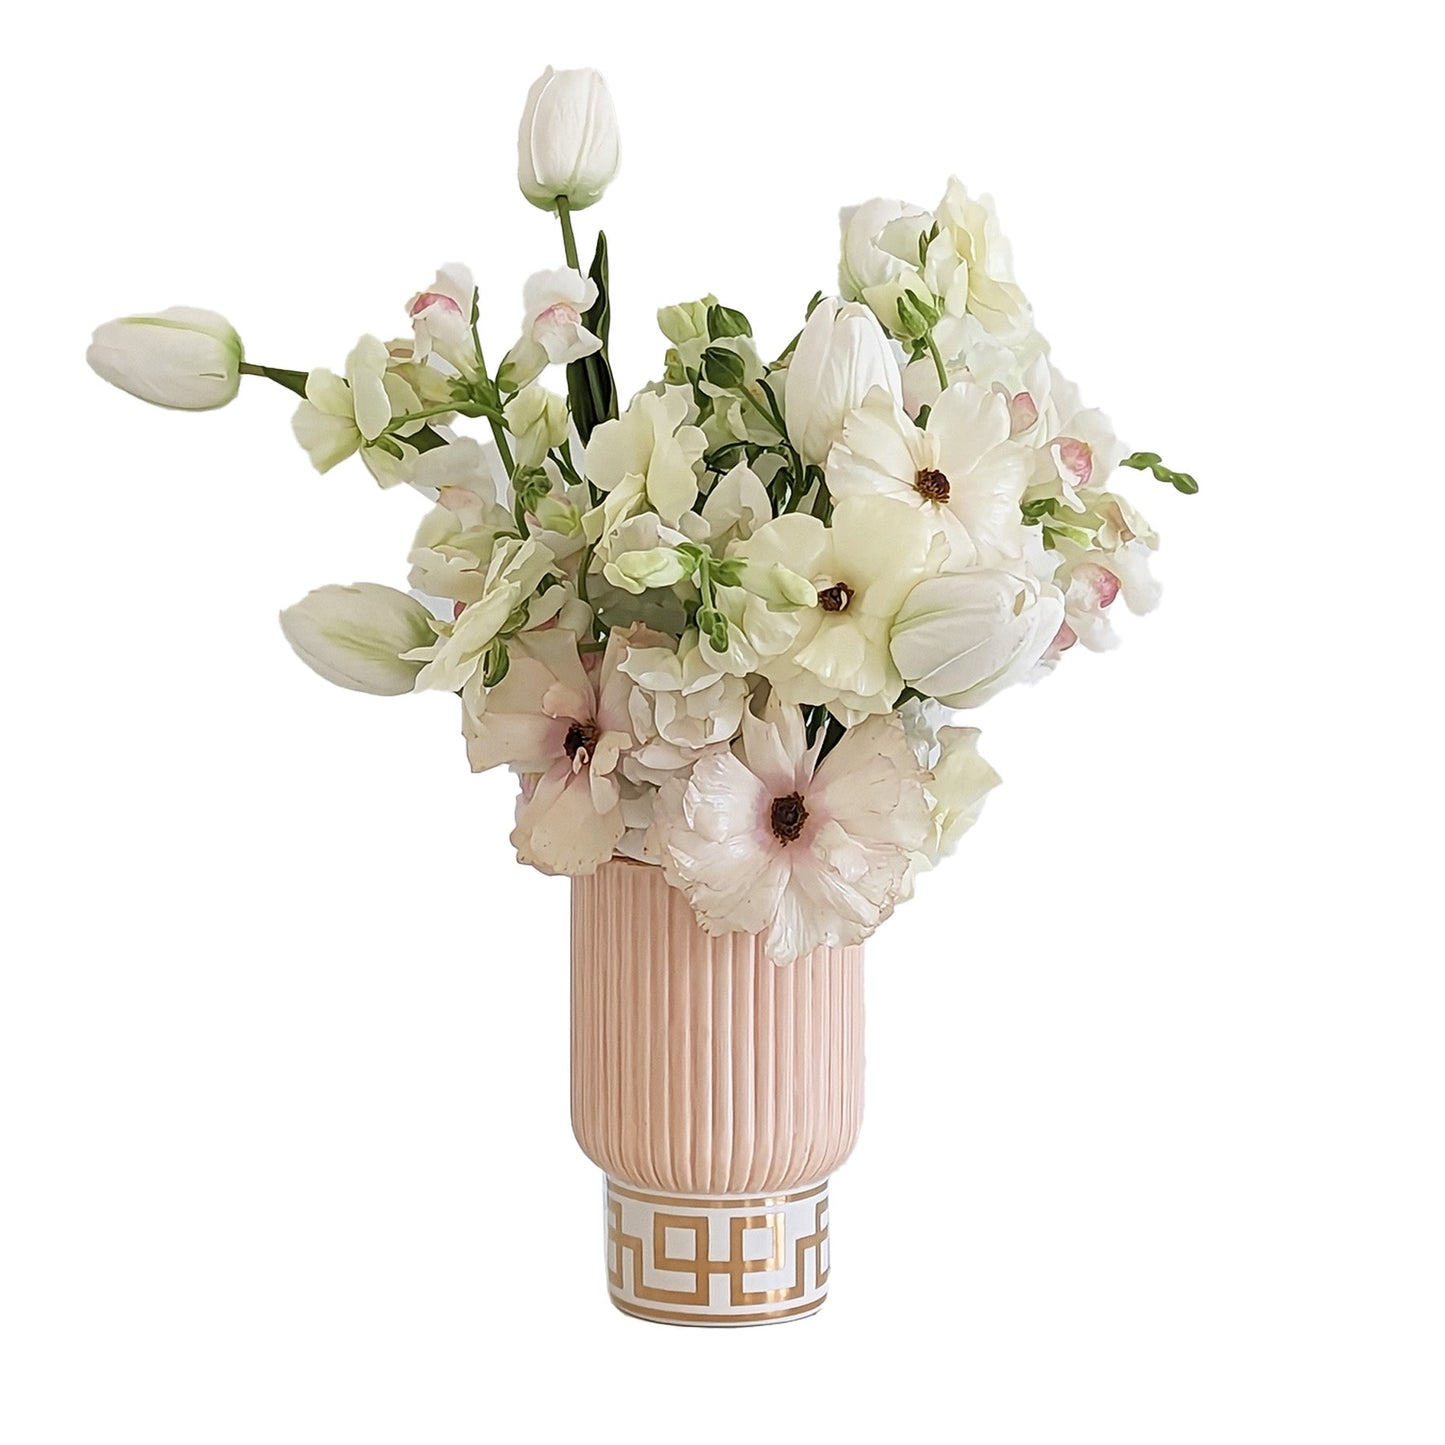 Golden Key Vase with 22K Gold Accent | Wholesale